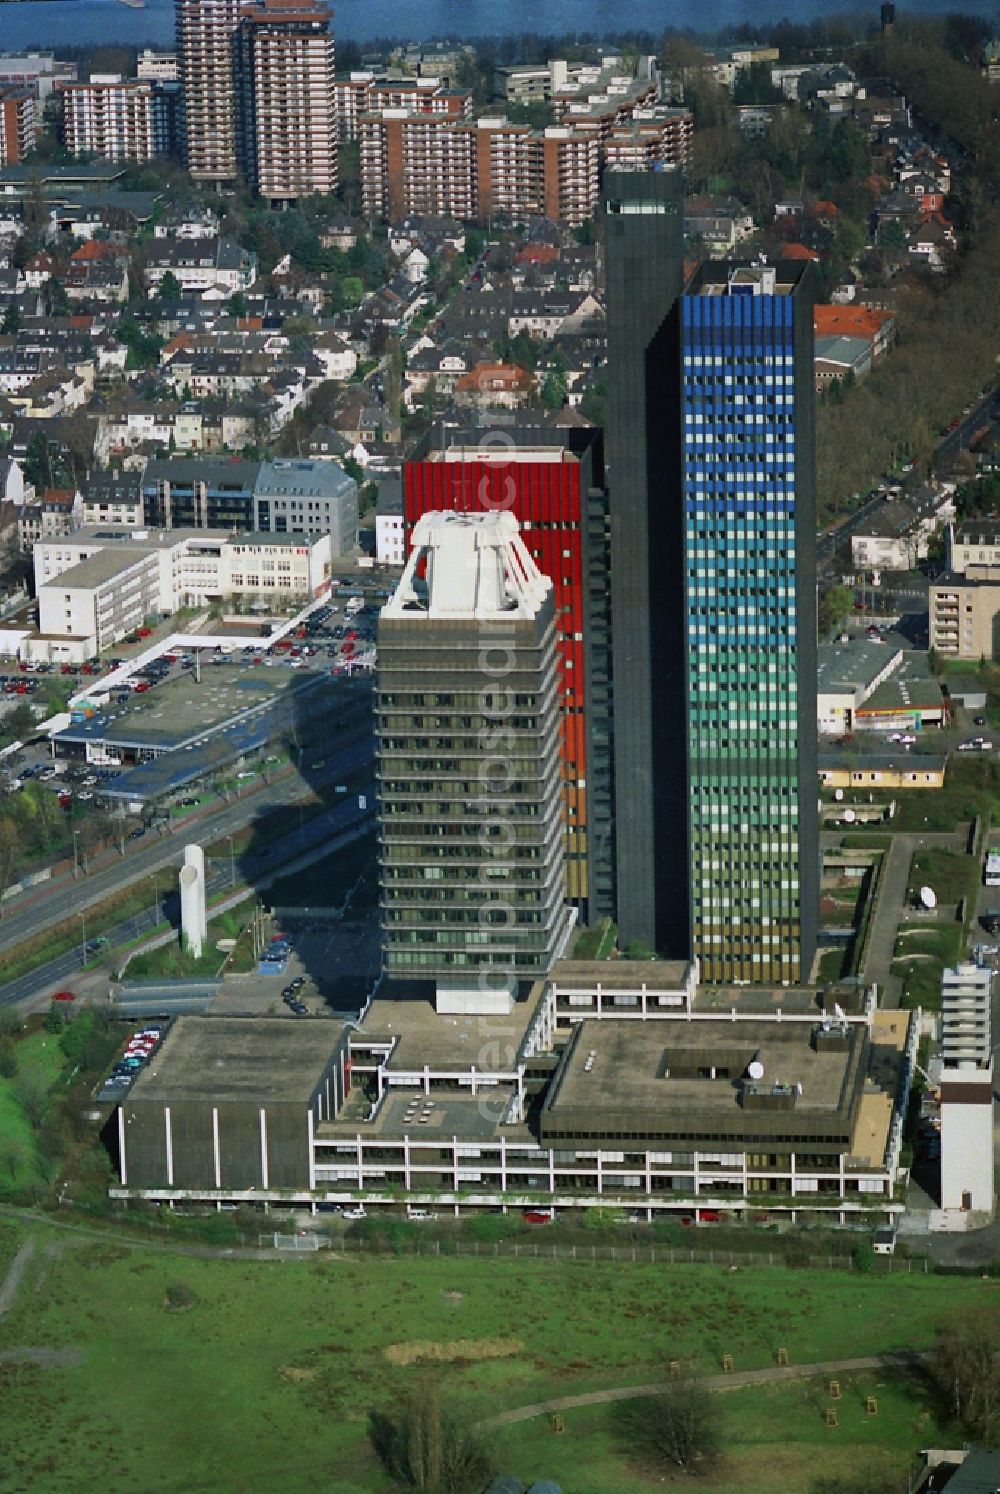 Köln from above - High-rise buildings of the ensemble of the media it Germany (DLF) and Deutsche Welle in North Rhine-Westphalia (NRW)